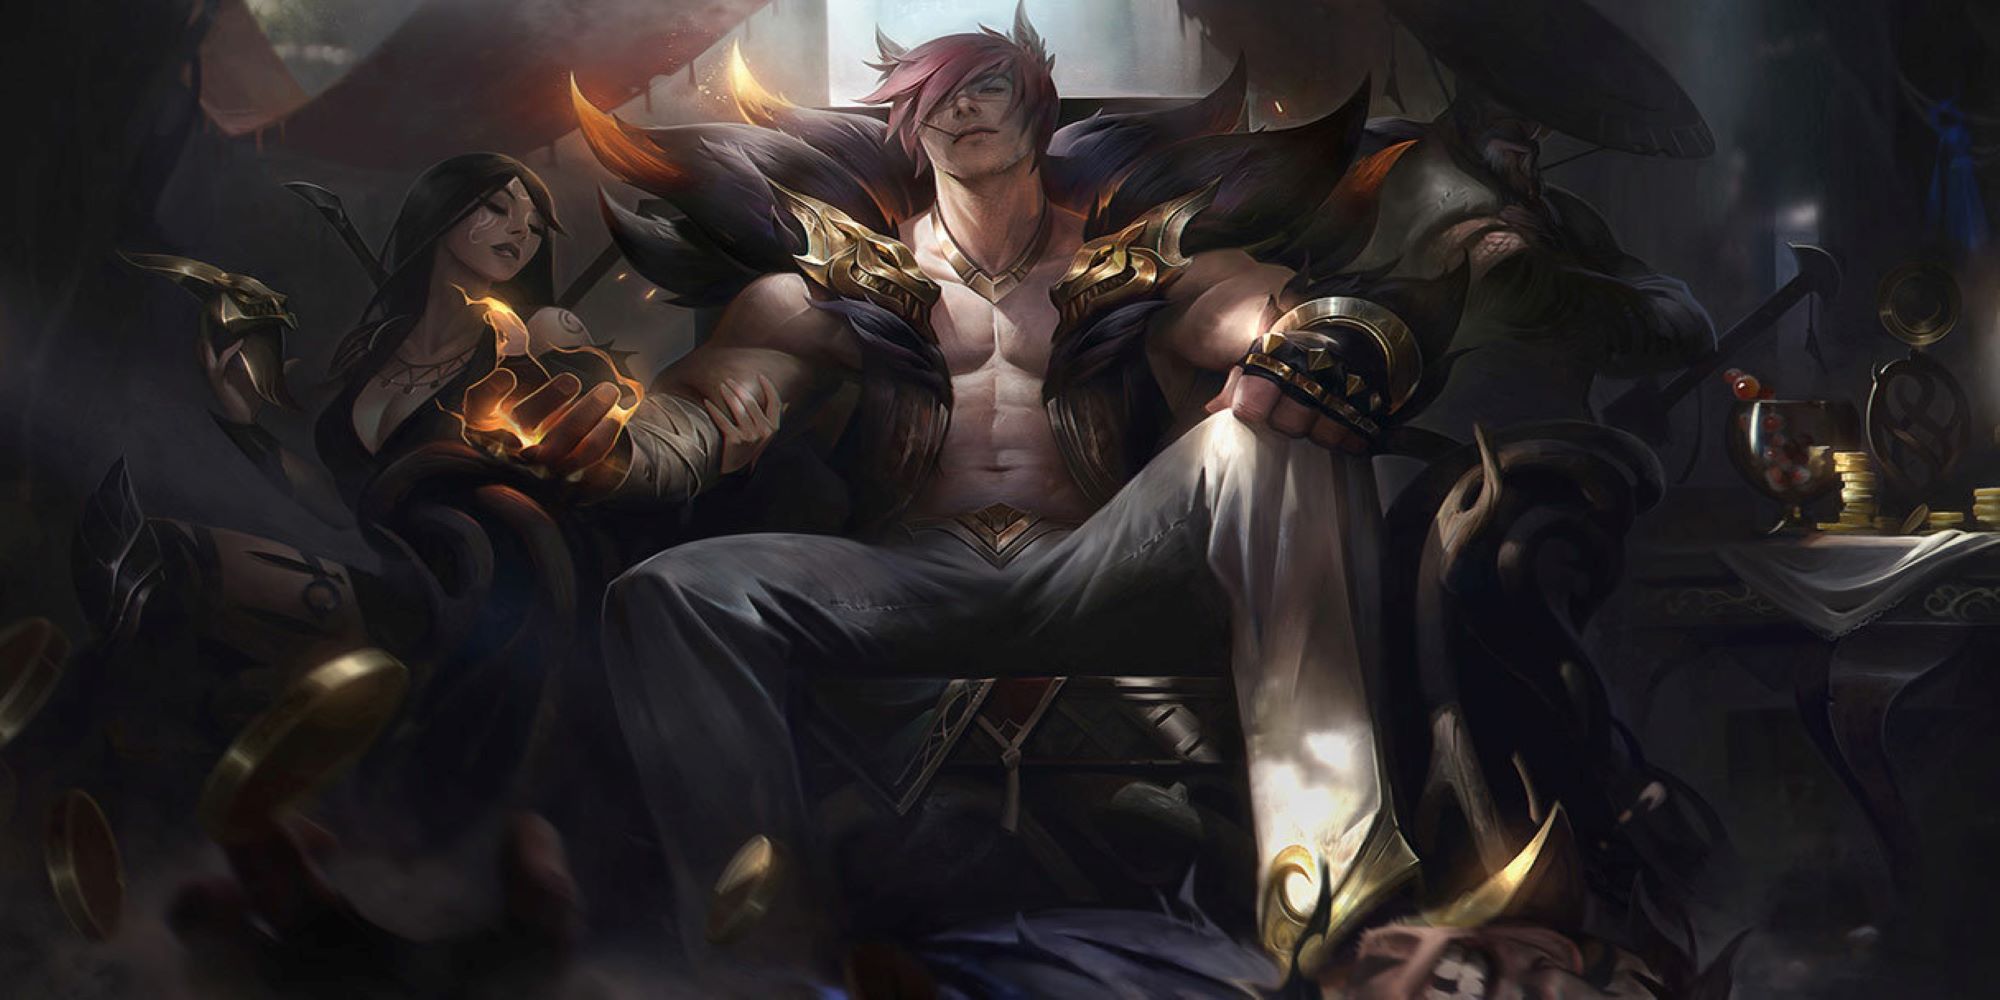 Seth boss from League of Legends